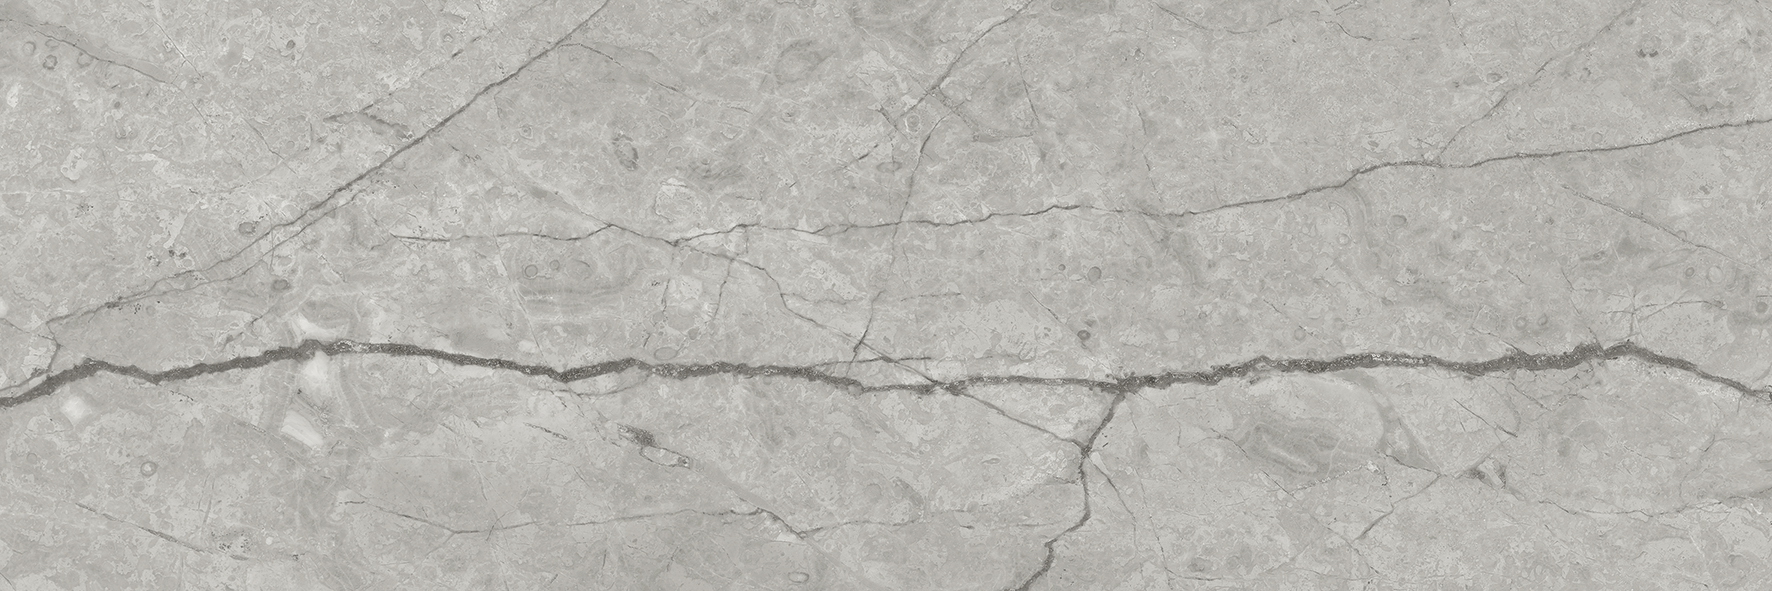 paradiso argento pattern glazed porcelain field tile from la marca anatolia collection distributed by surface group international honed finish rectified edge 4x12 rectangle shape